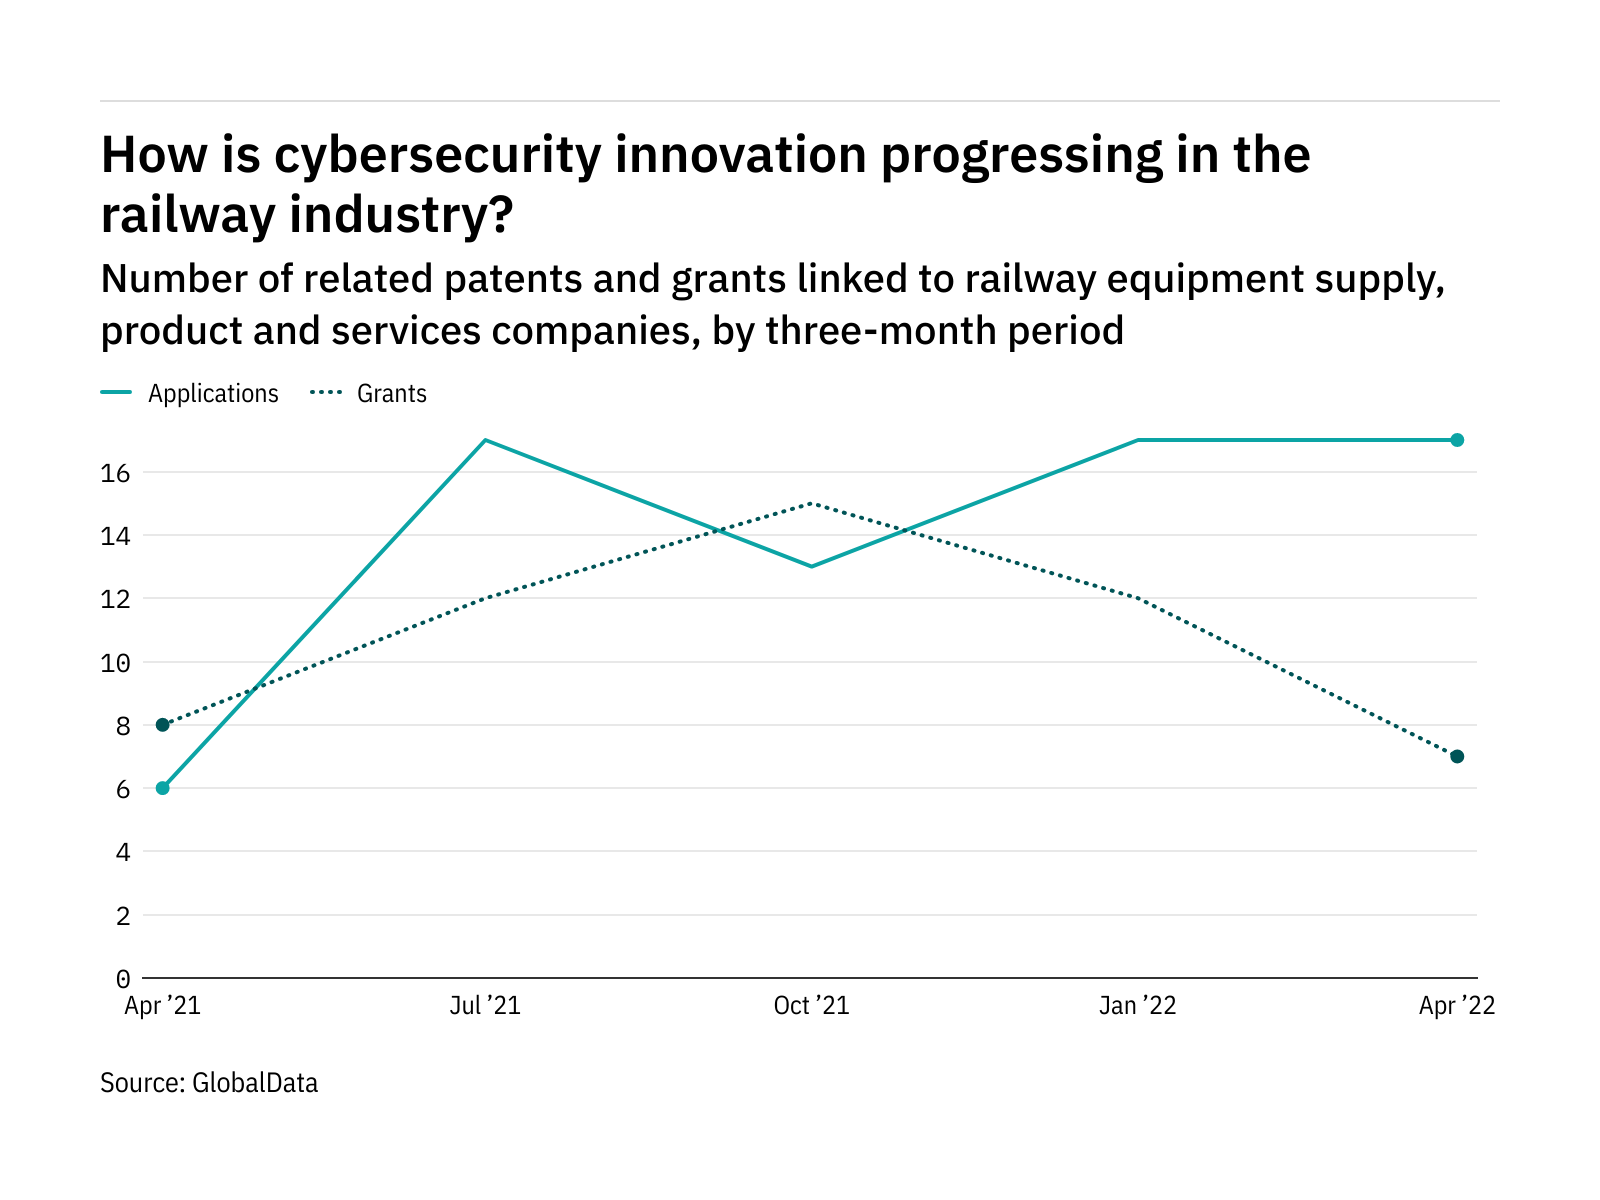 How is cybersecurity innovation progressing in the railway industry?